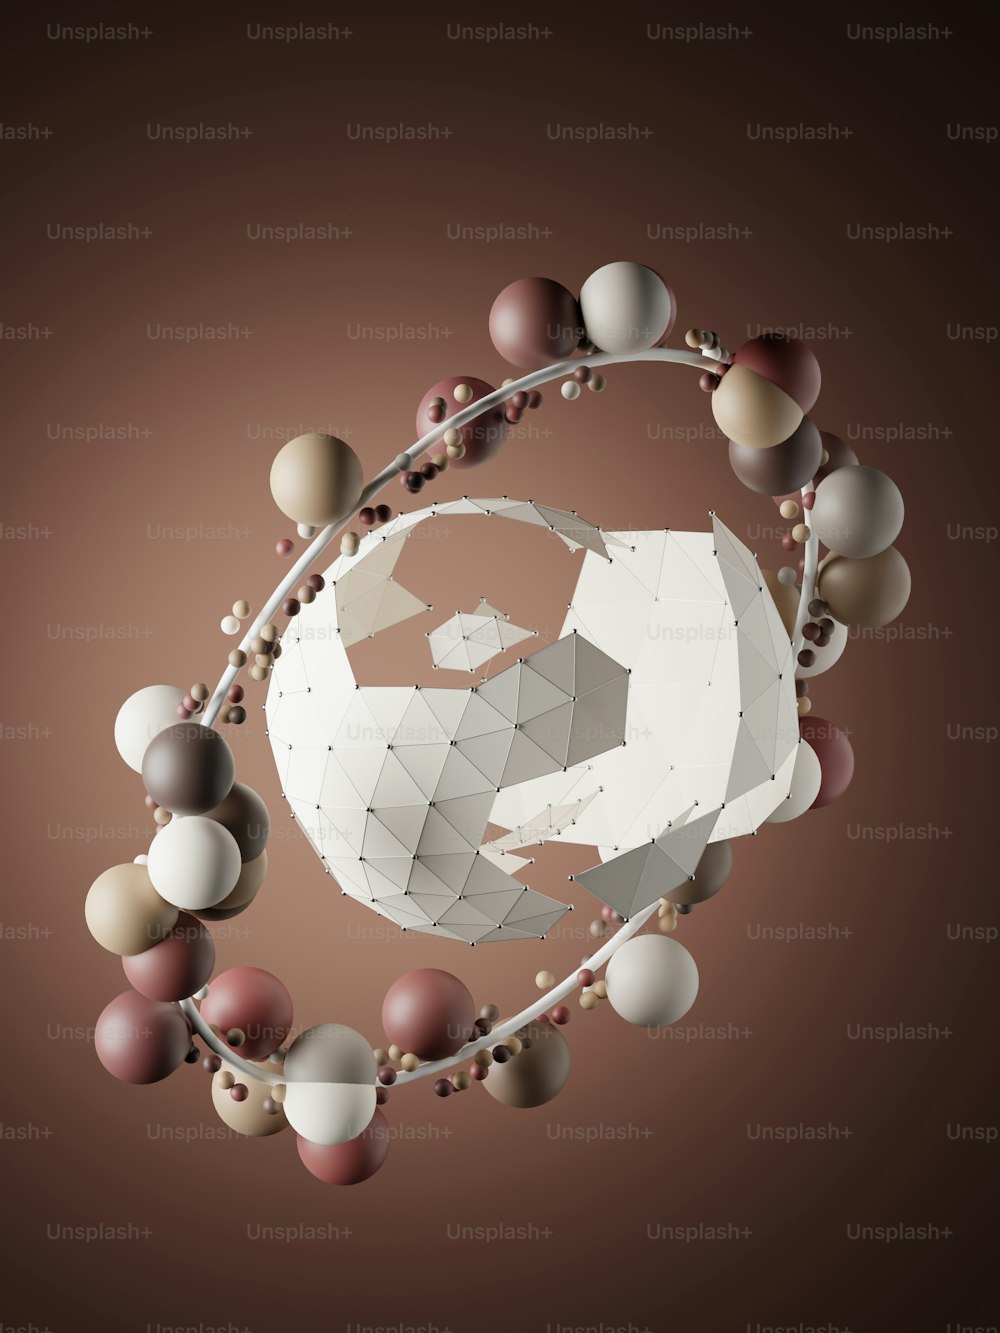 a stylized image of a soccer ball surrounded by balls